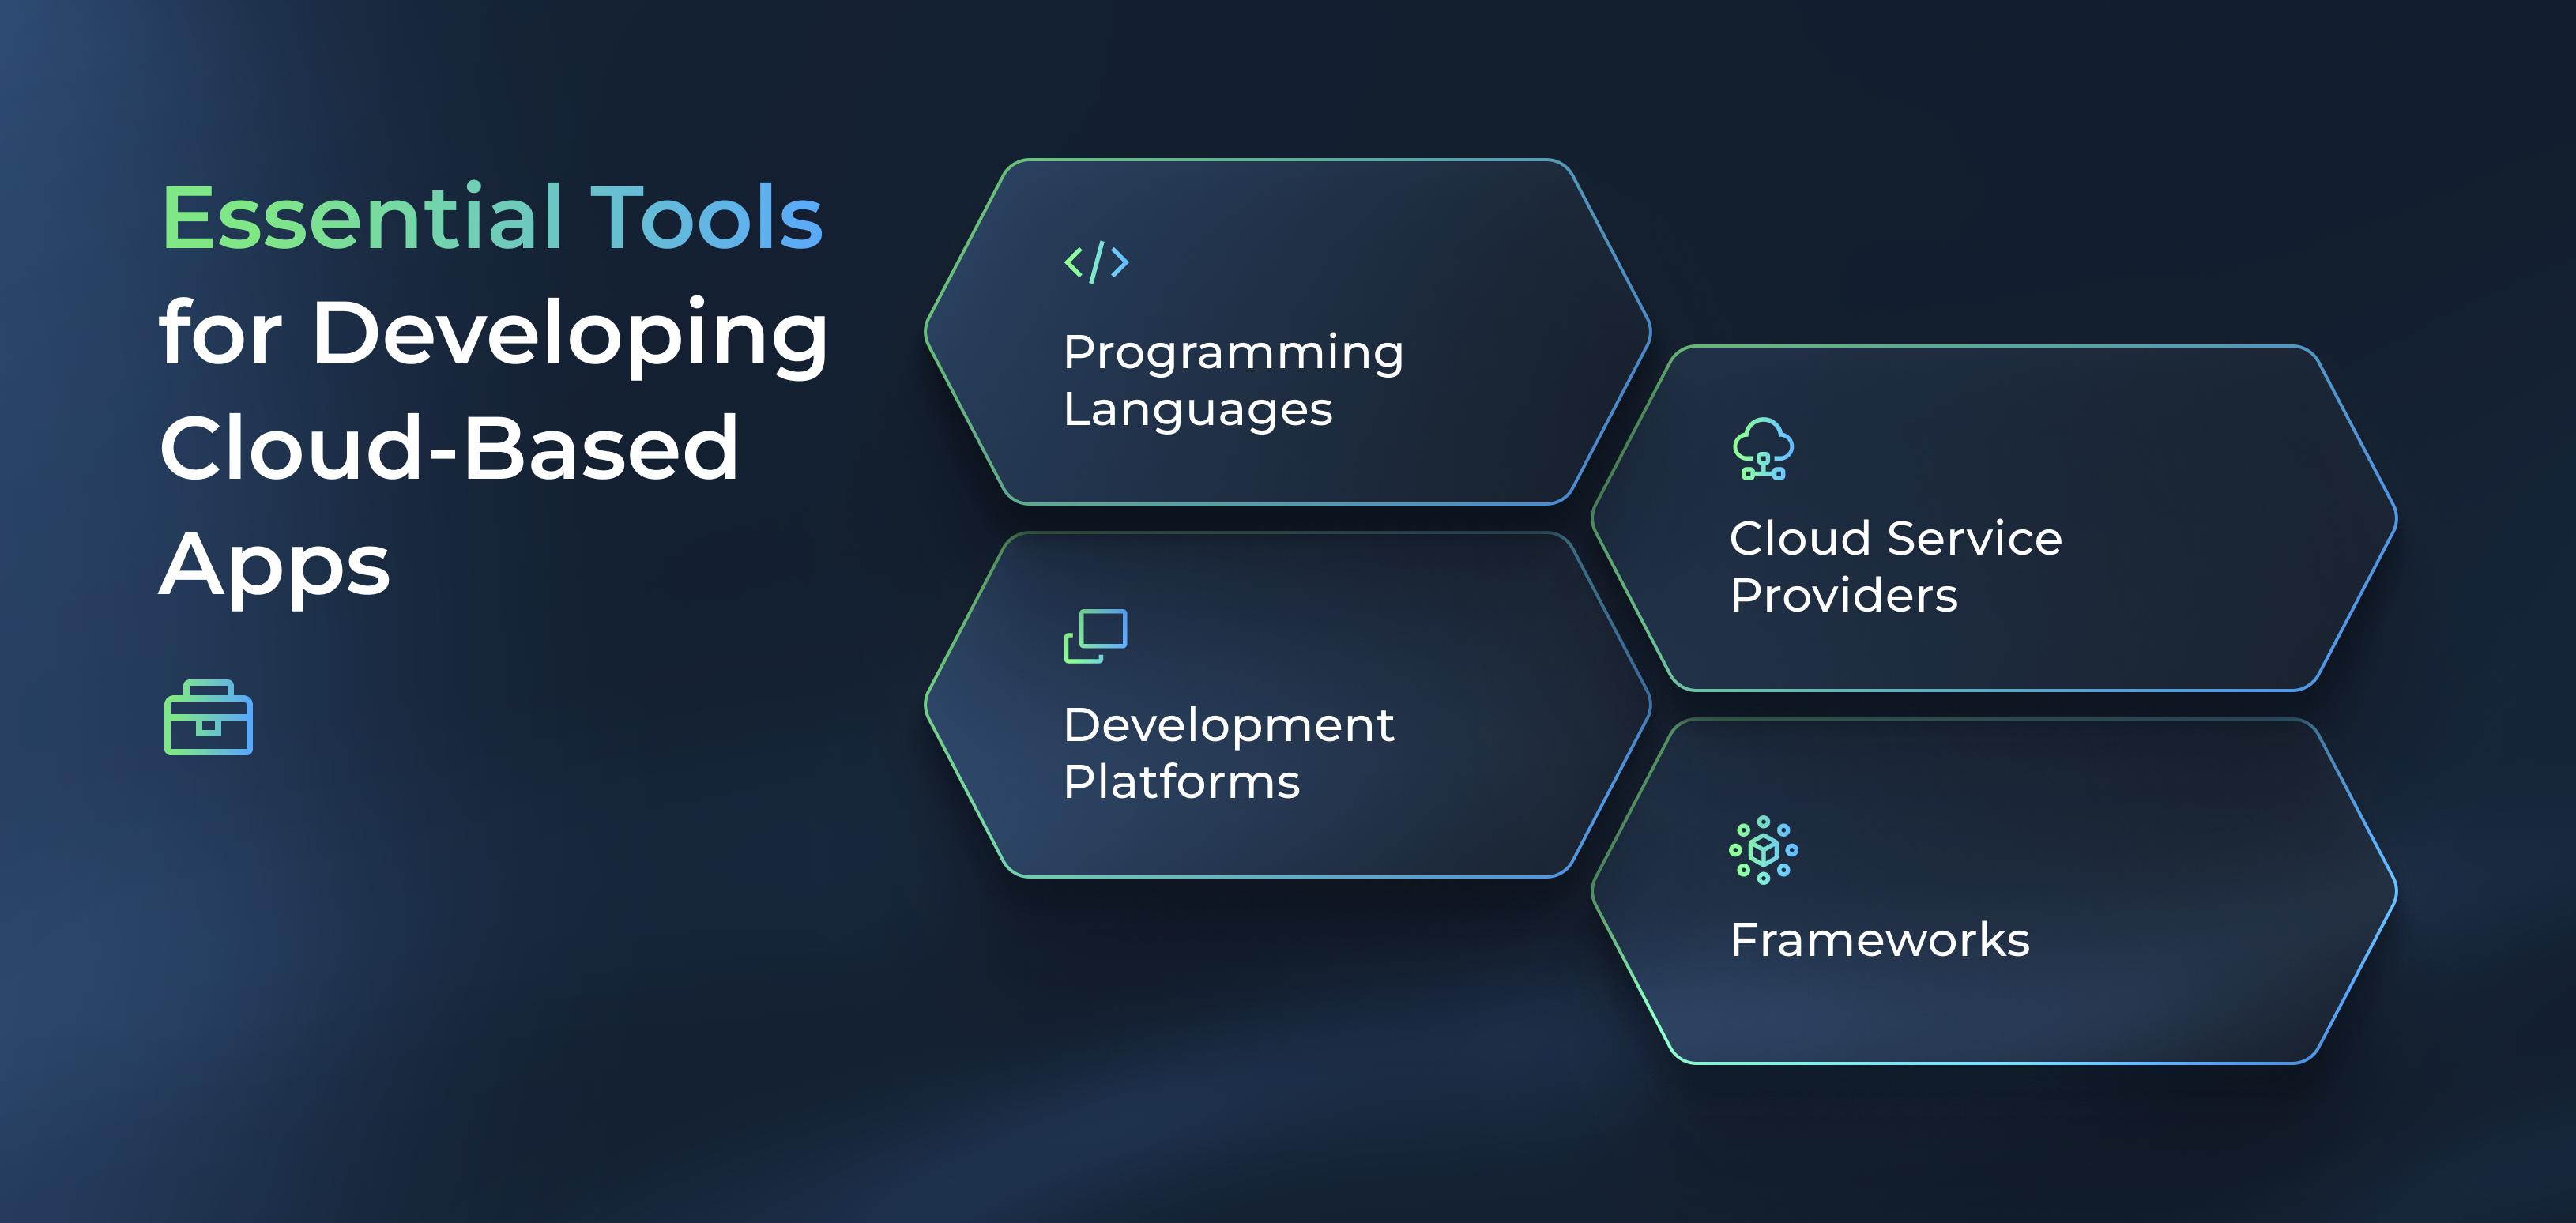 Essential Tools for Developing Cloud-Based Apps
Programming Languages
Cloud Service Providers
Development Platforms
Frameworks
